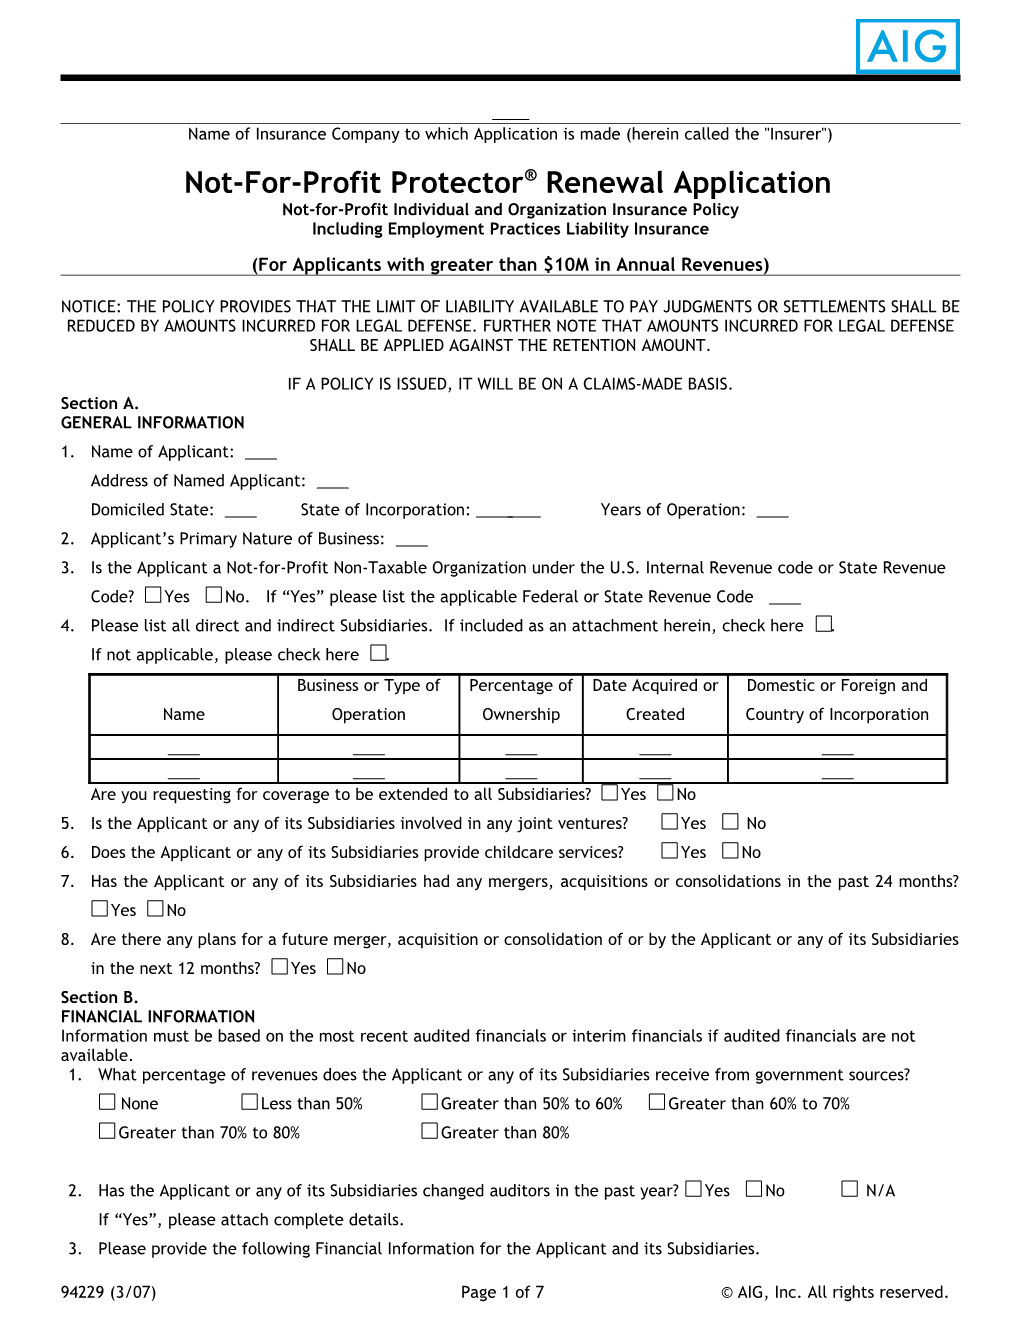 Not-For-Profit Protector Renewal Application